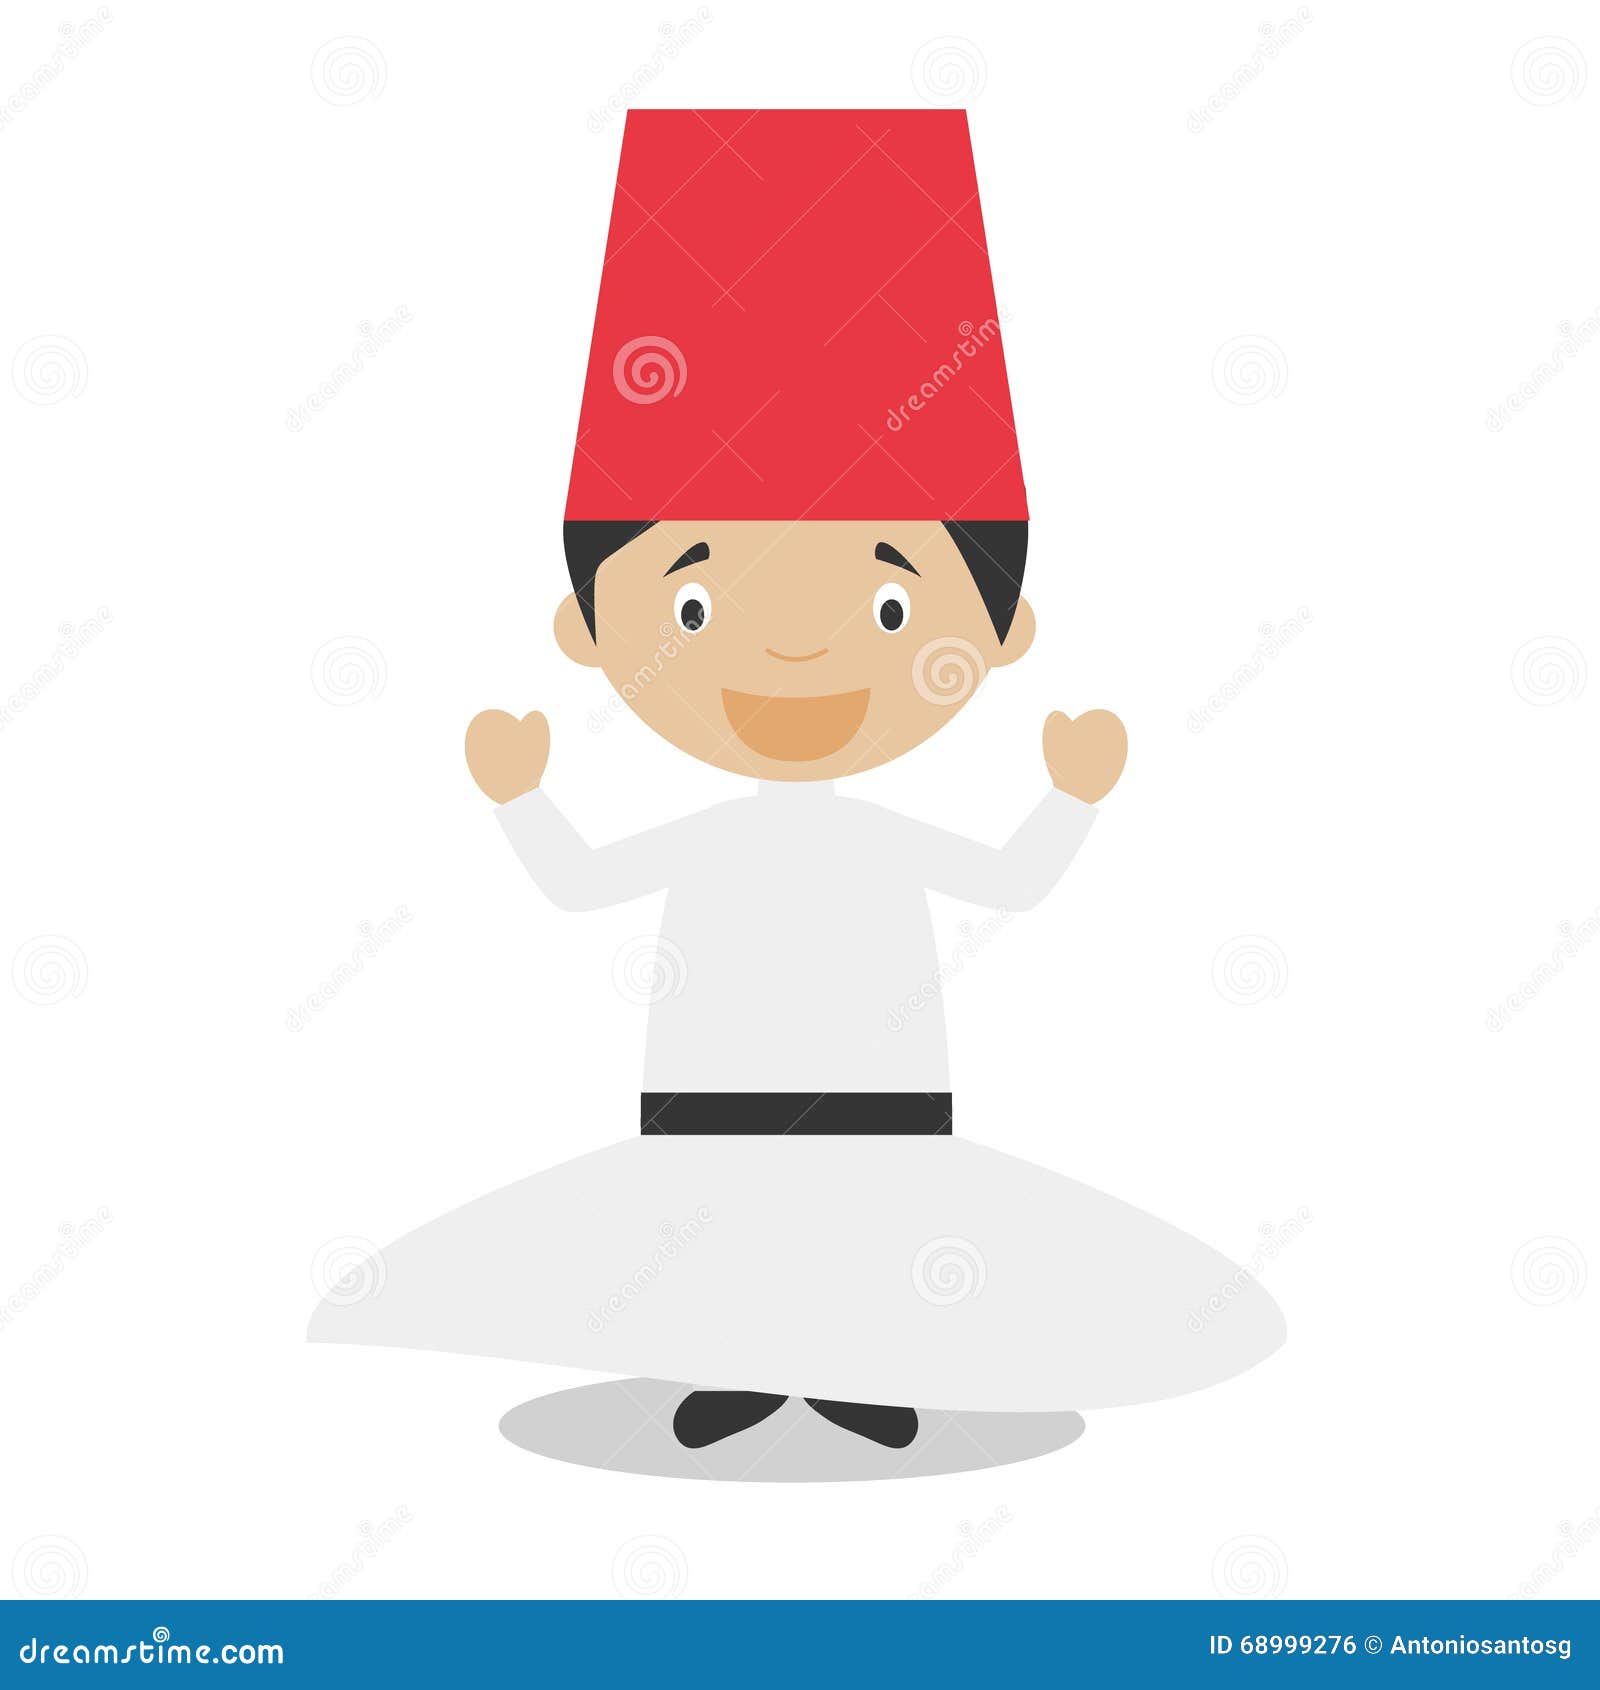 character from turkey. whirling dervishes dressed in the traditional way